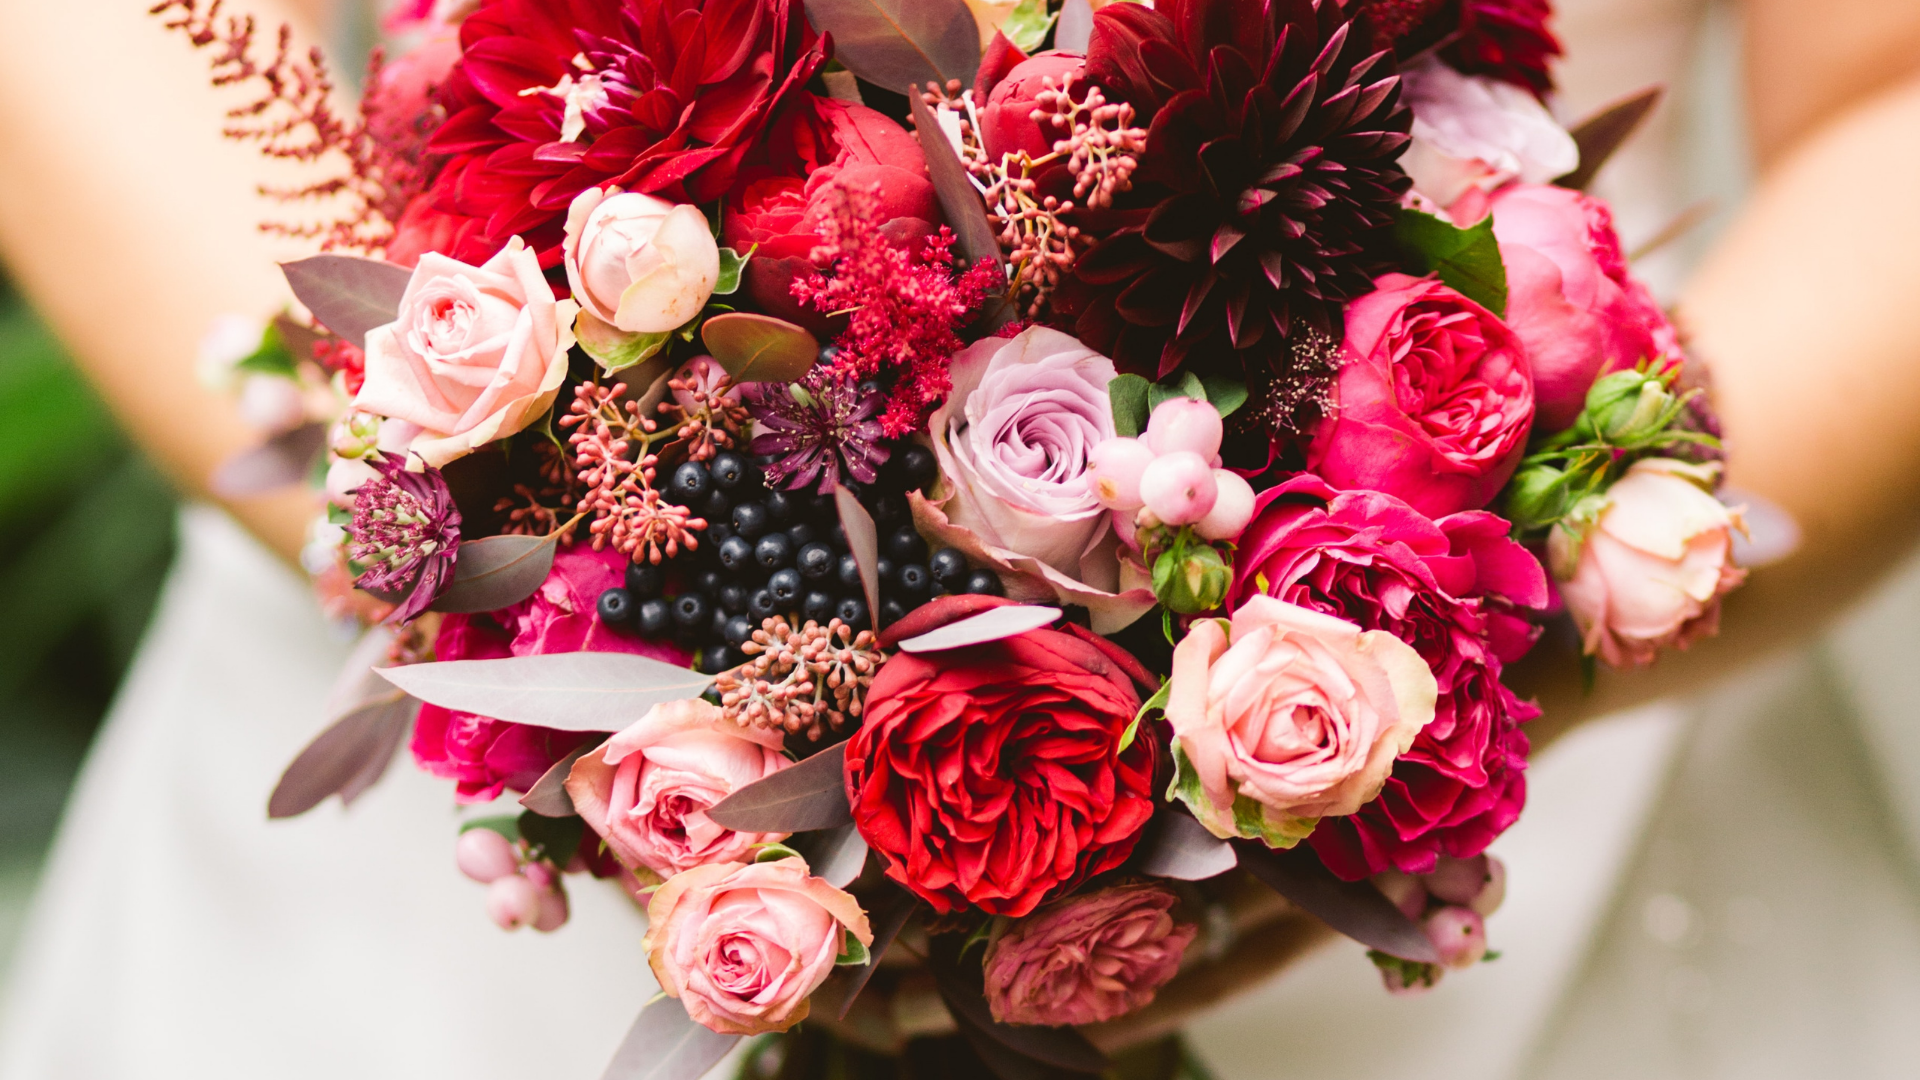 3 Things to Consider When Choosing Your Personal Wedding Flowers